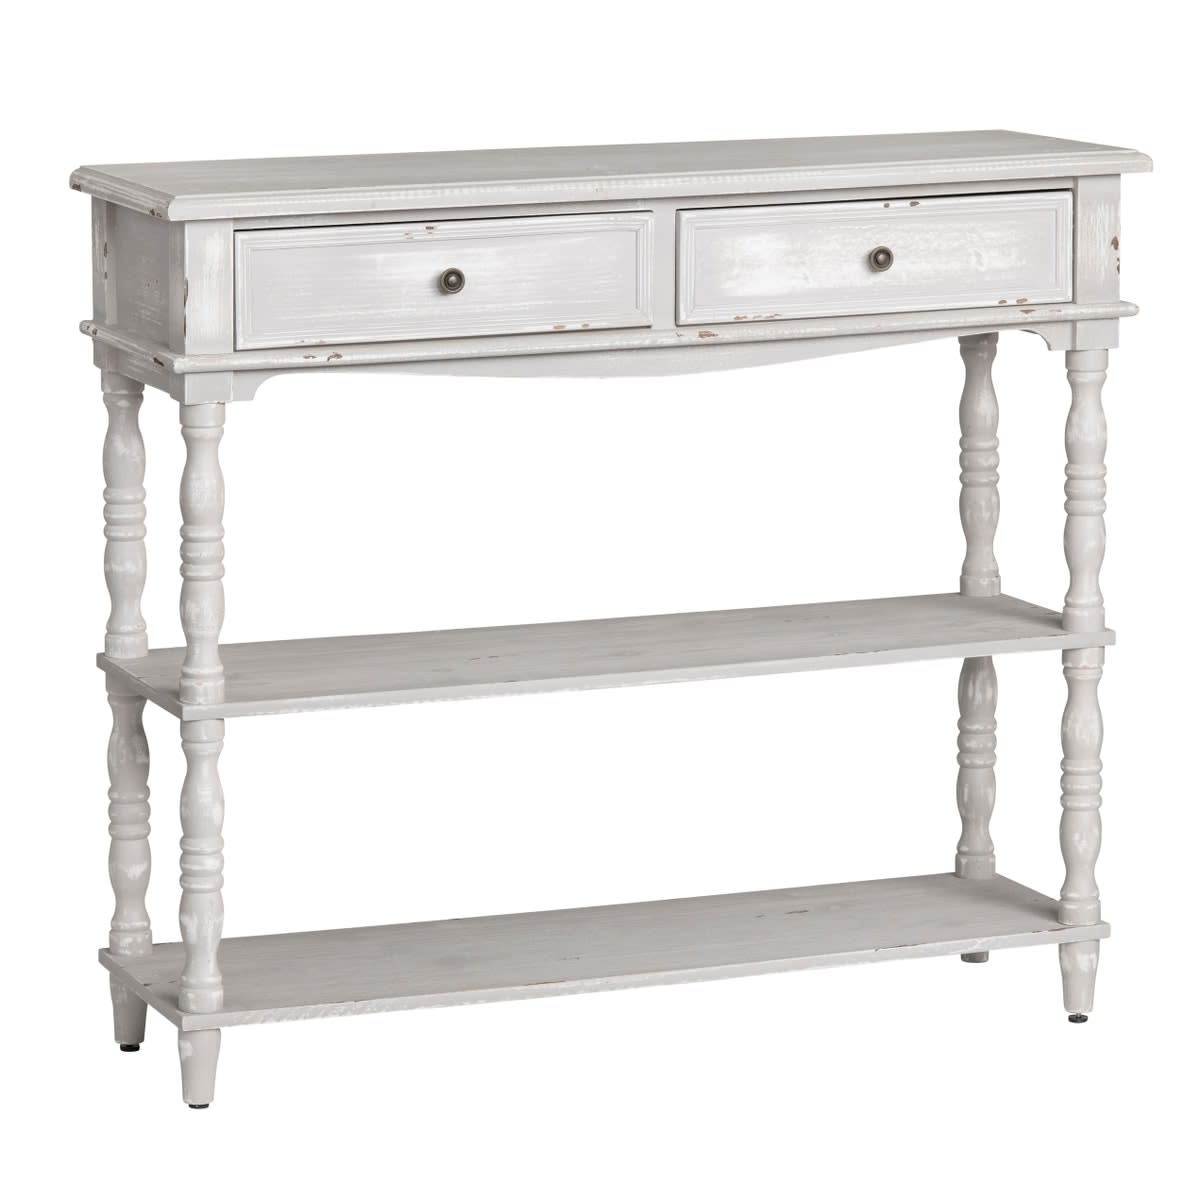 Weston Console Table, 42x13x36 Furniture Available for Local Delivery and Pick Up